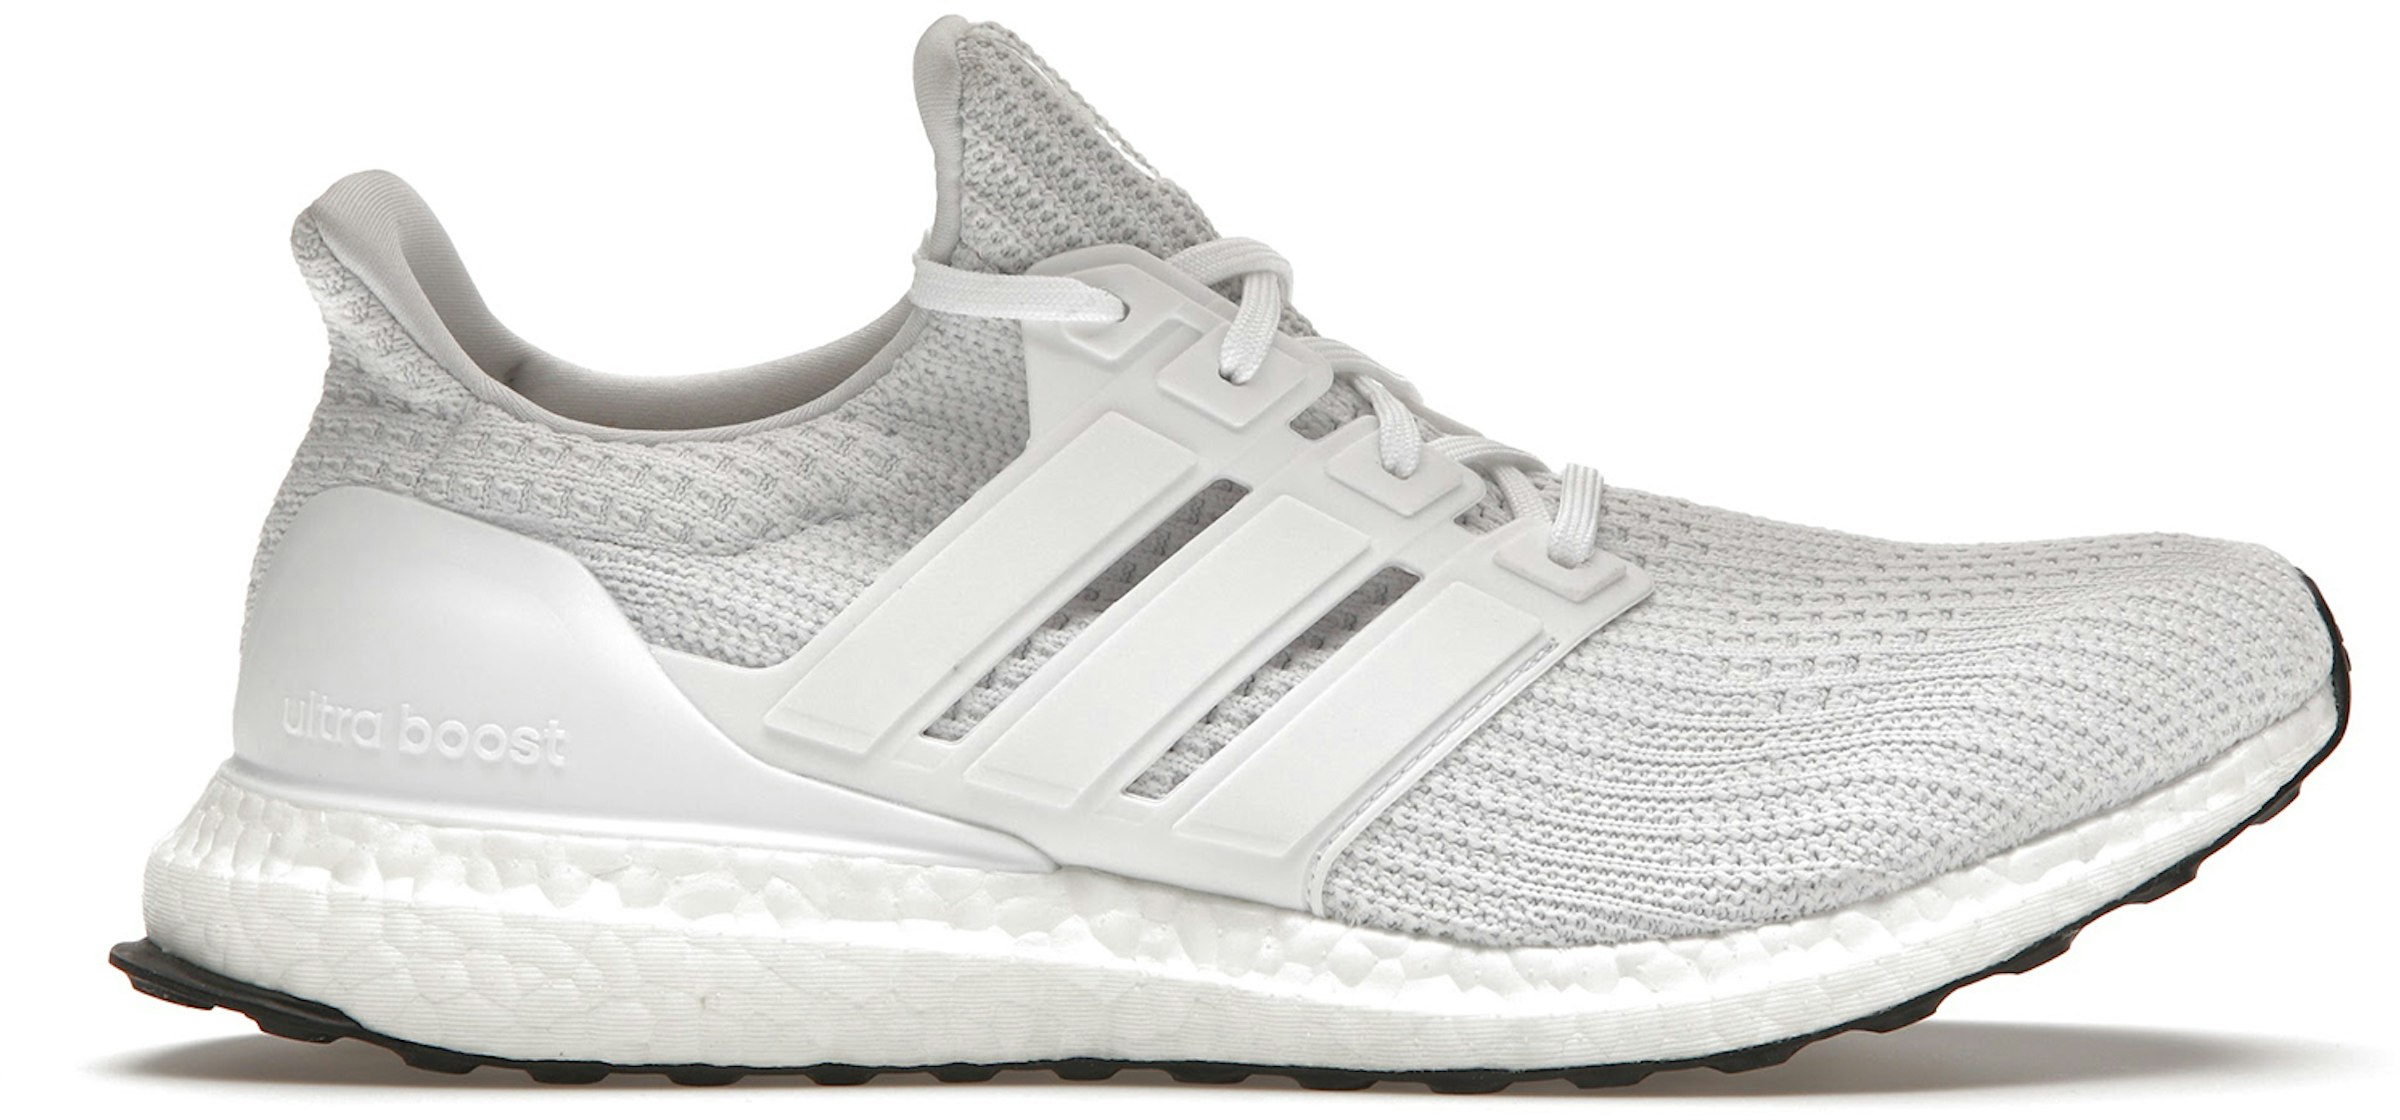 adidas Ultra Boost 4.0 DNA Cloud White - FY9122 - US